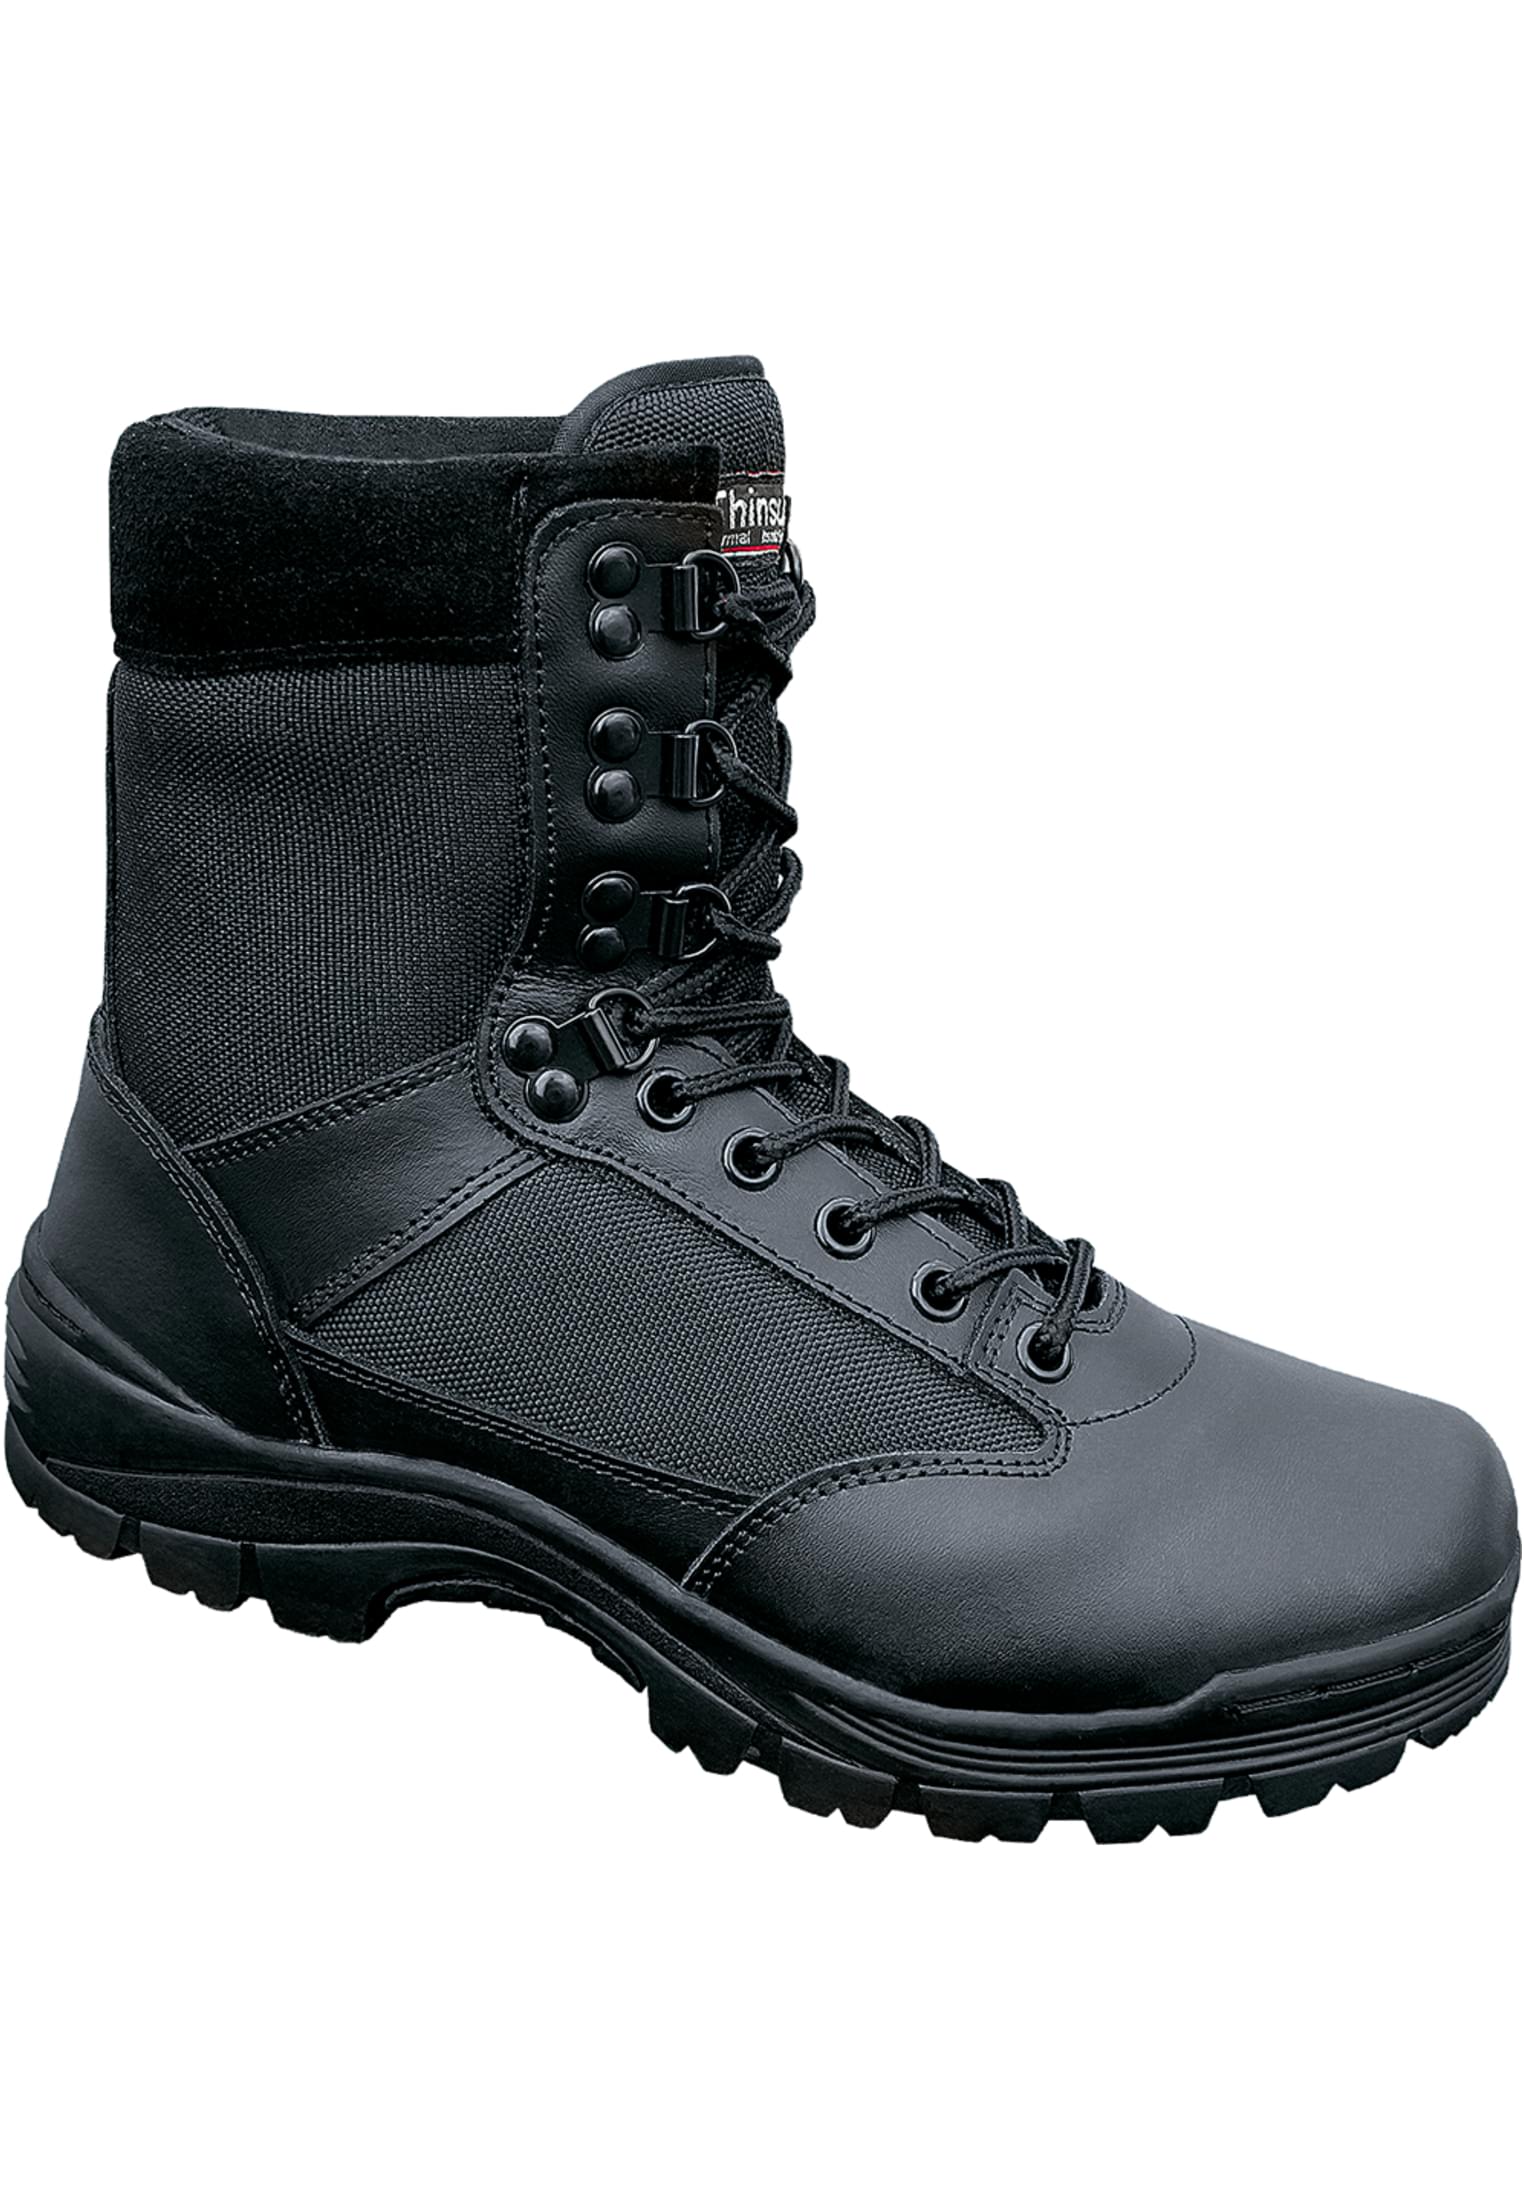 Schuhe Tactical Boots in Farbe black